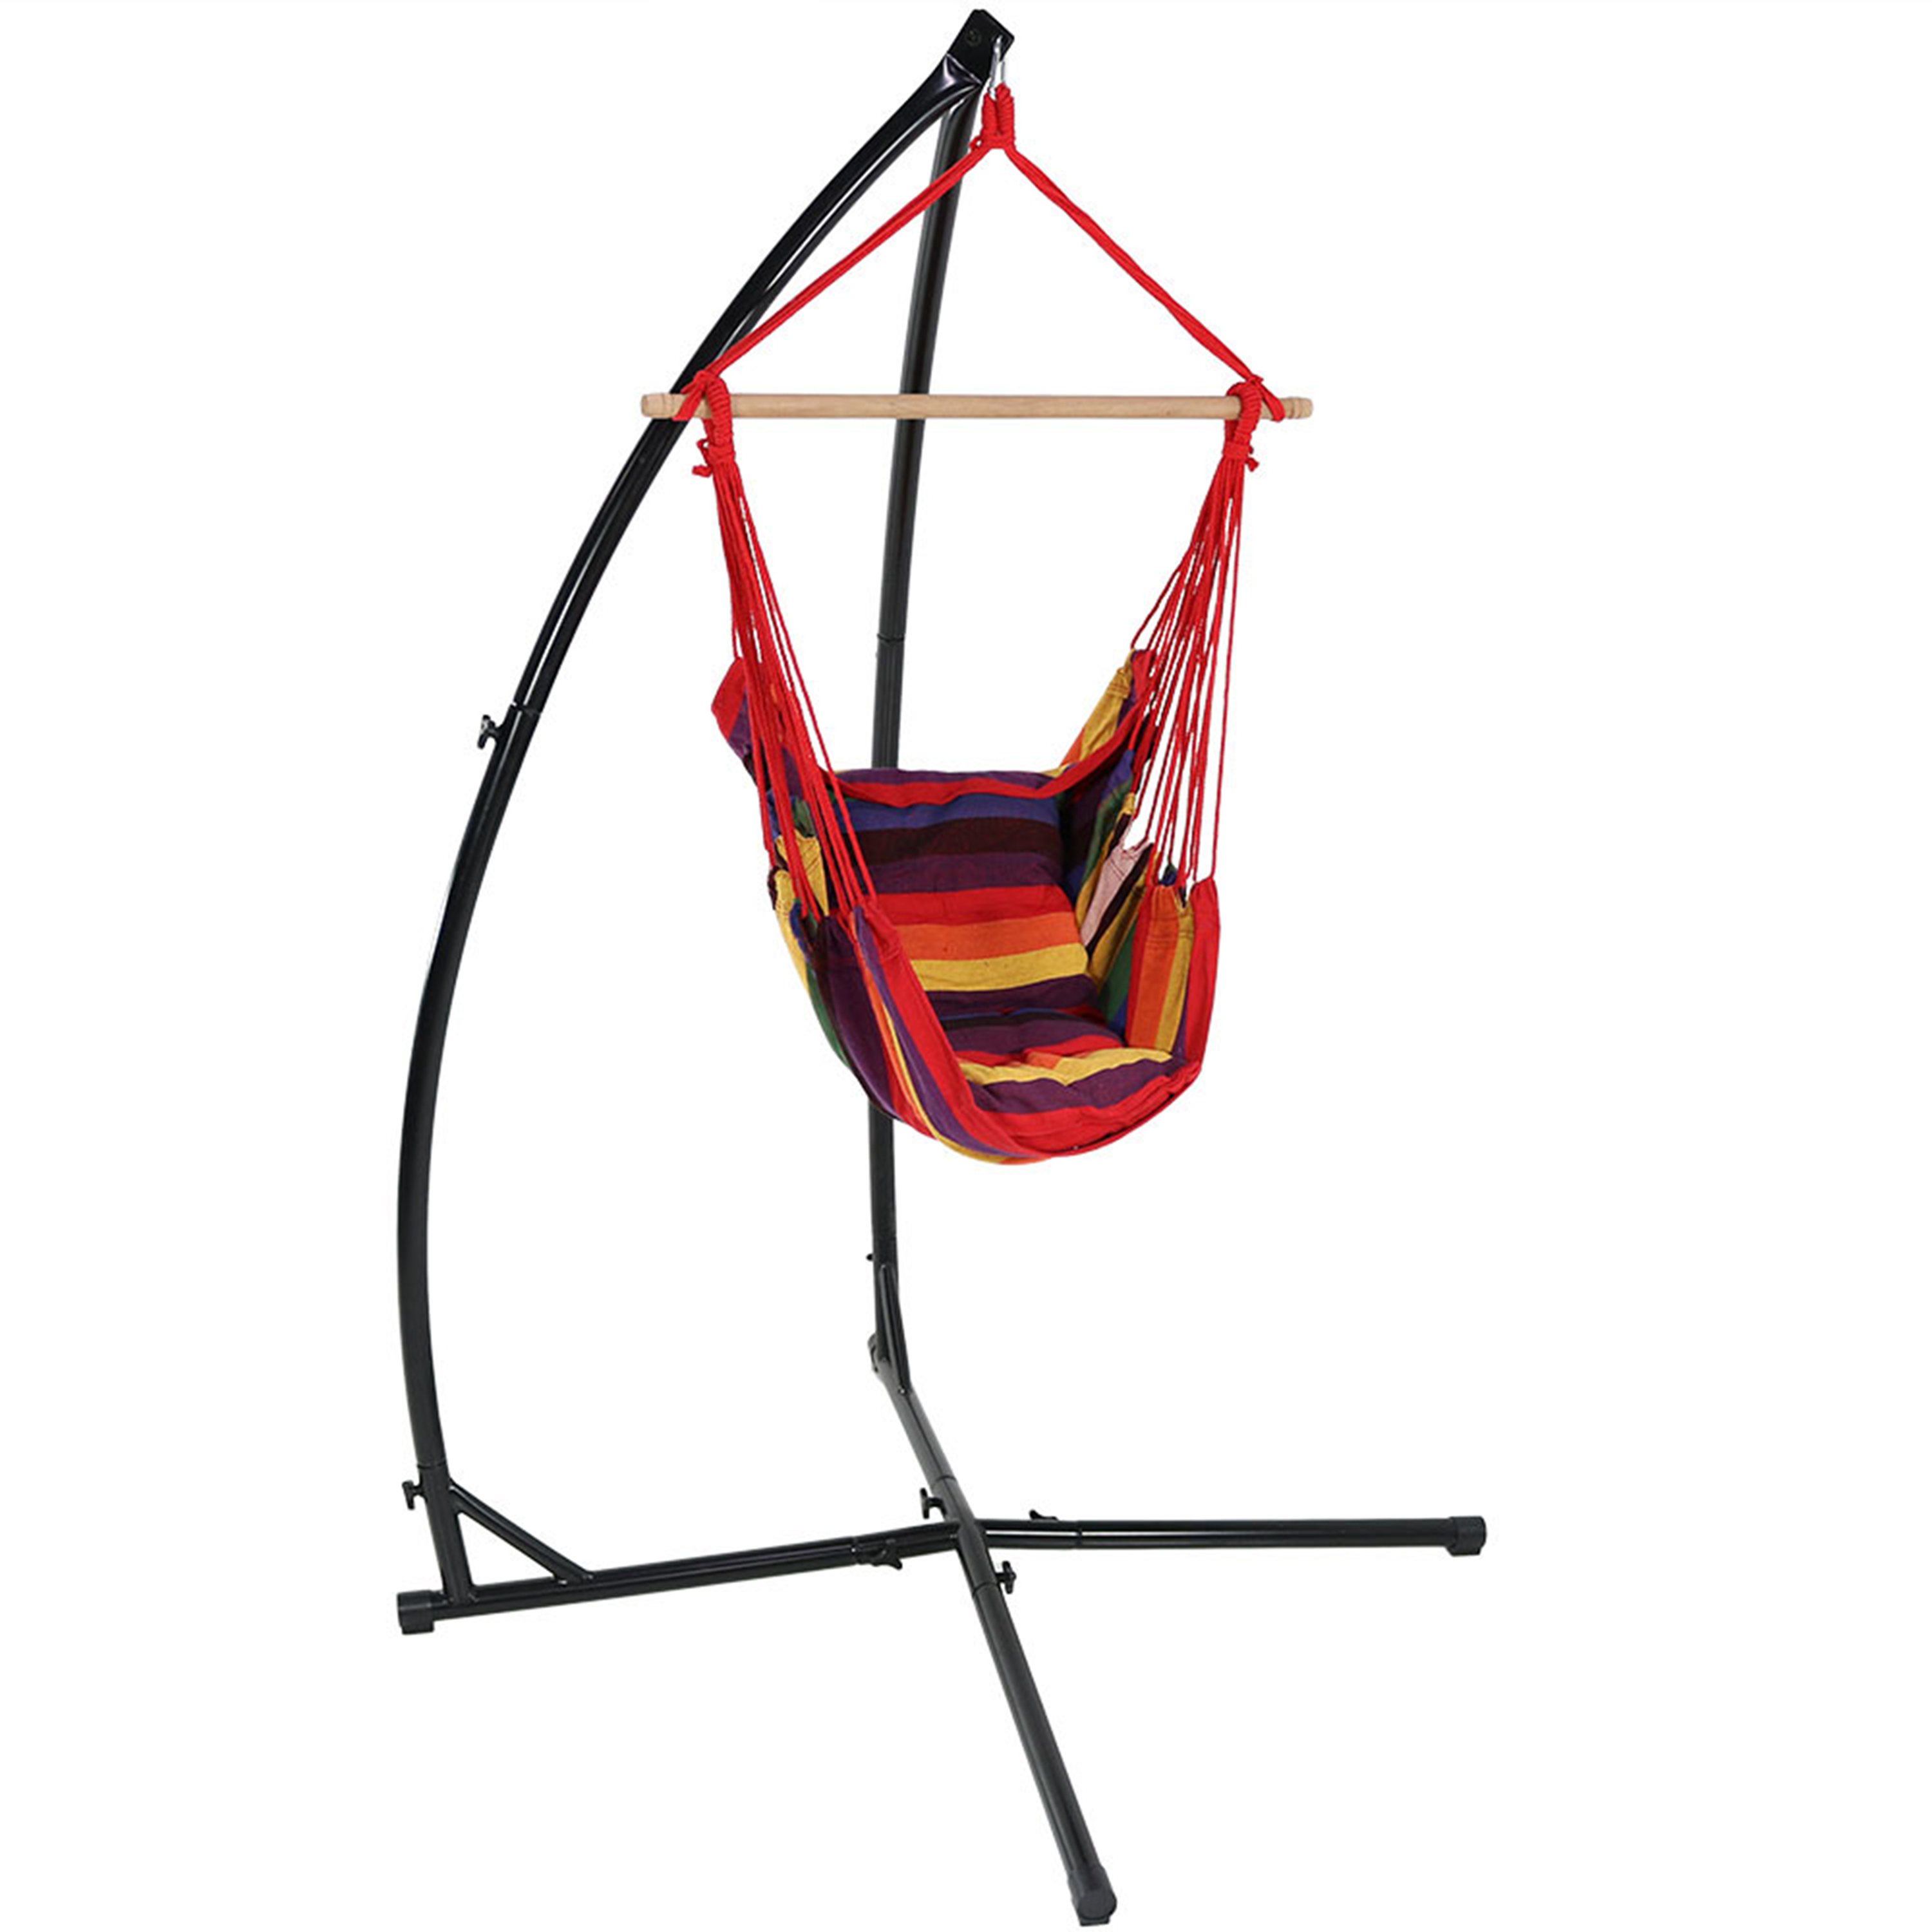 Sunnydaze Hanging Hammock Chair Swing and X-Stand Set, Outdoor Use, Max Weight: 250 pounds, Sunset